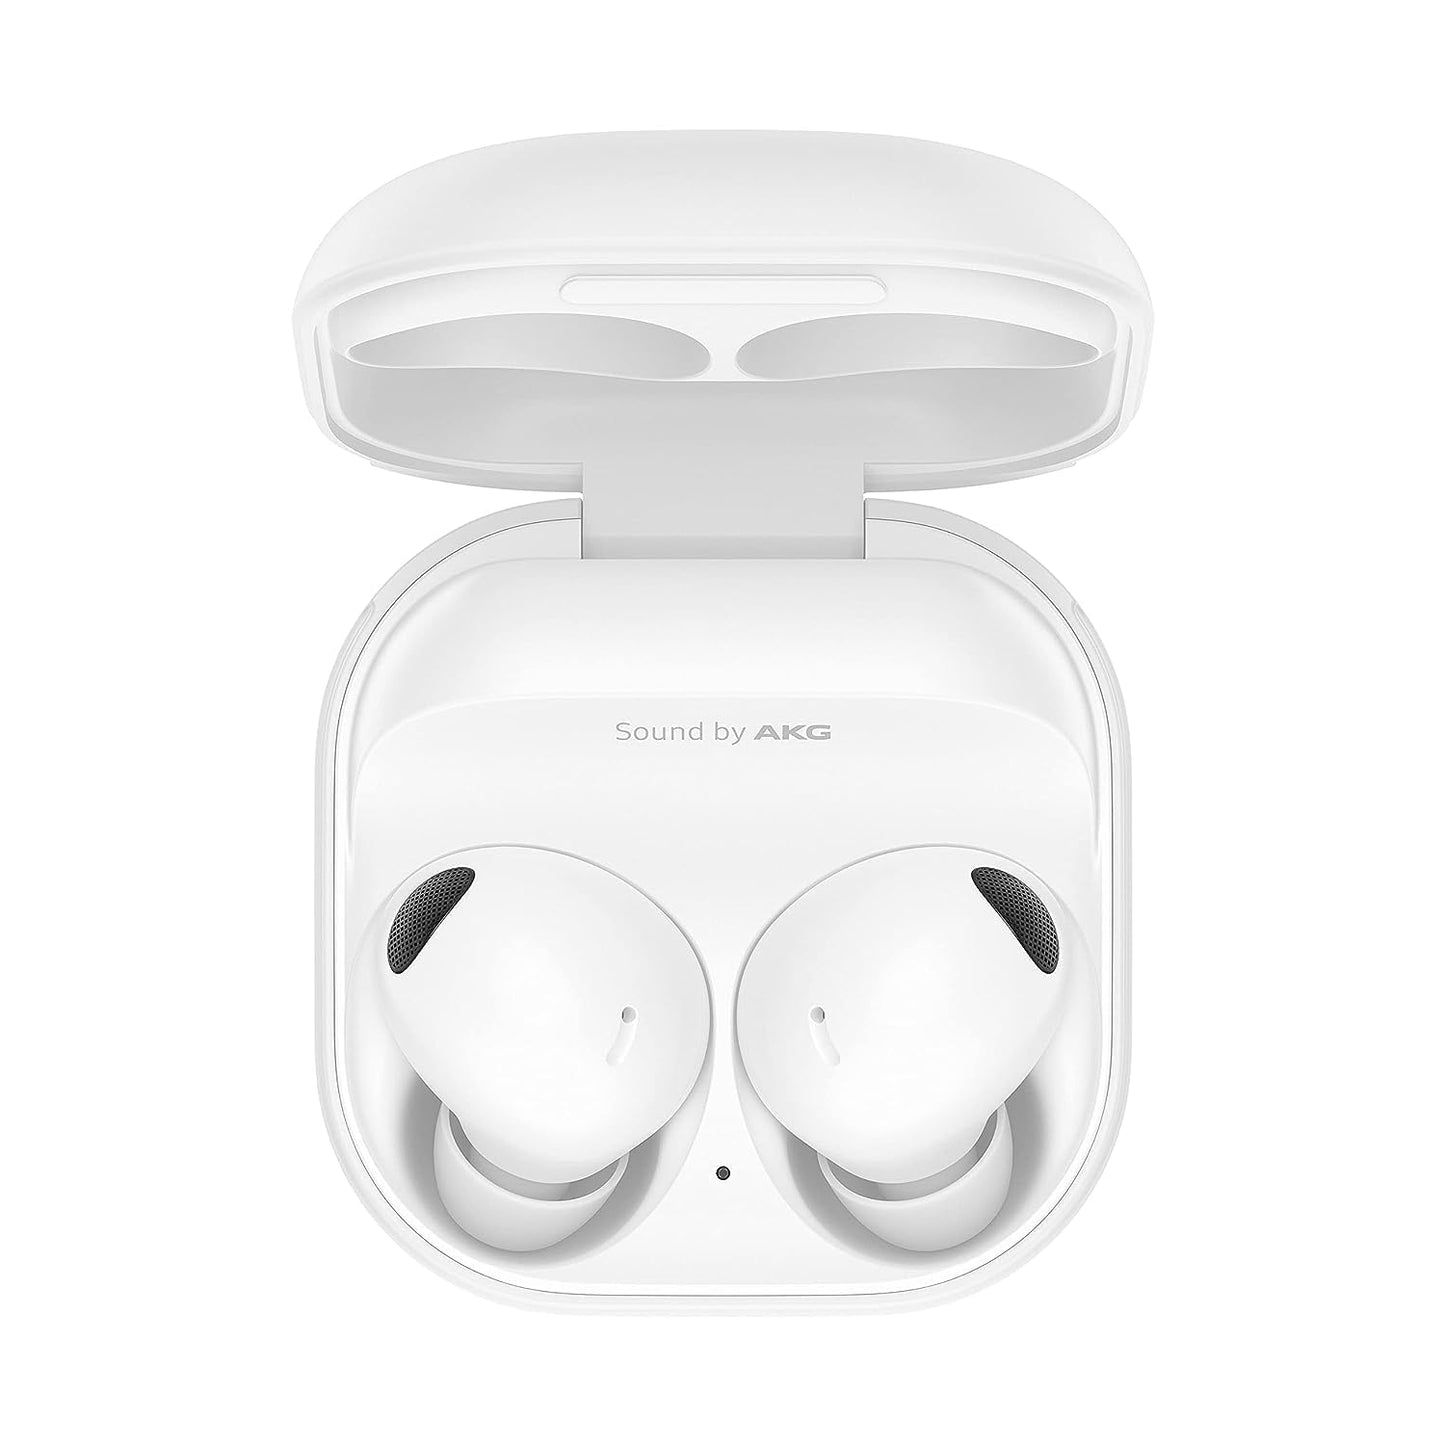 Samsung Galaxy Buds2 Pro Bluetooth Earbuds, True Wireless, Noise Cancelling, Charging Case, Quality Sound, Water Resistant, White (UAE Version)